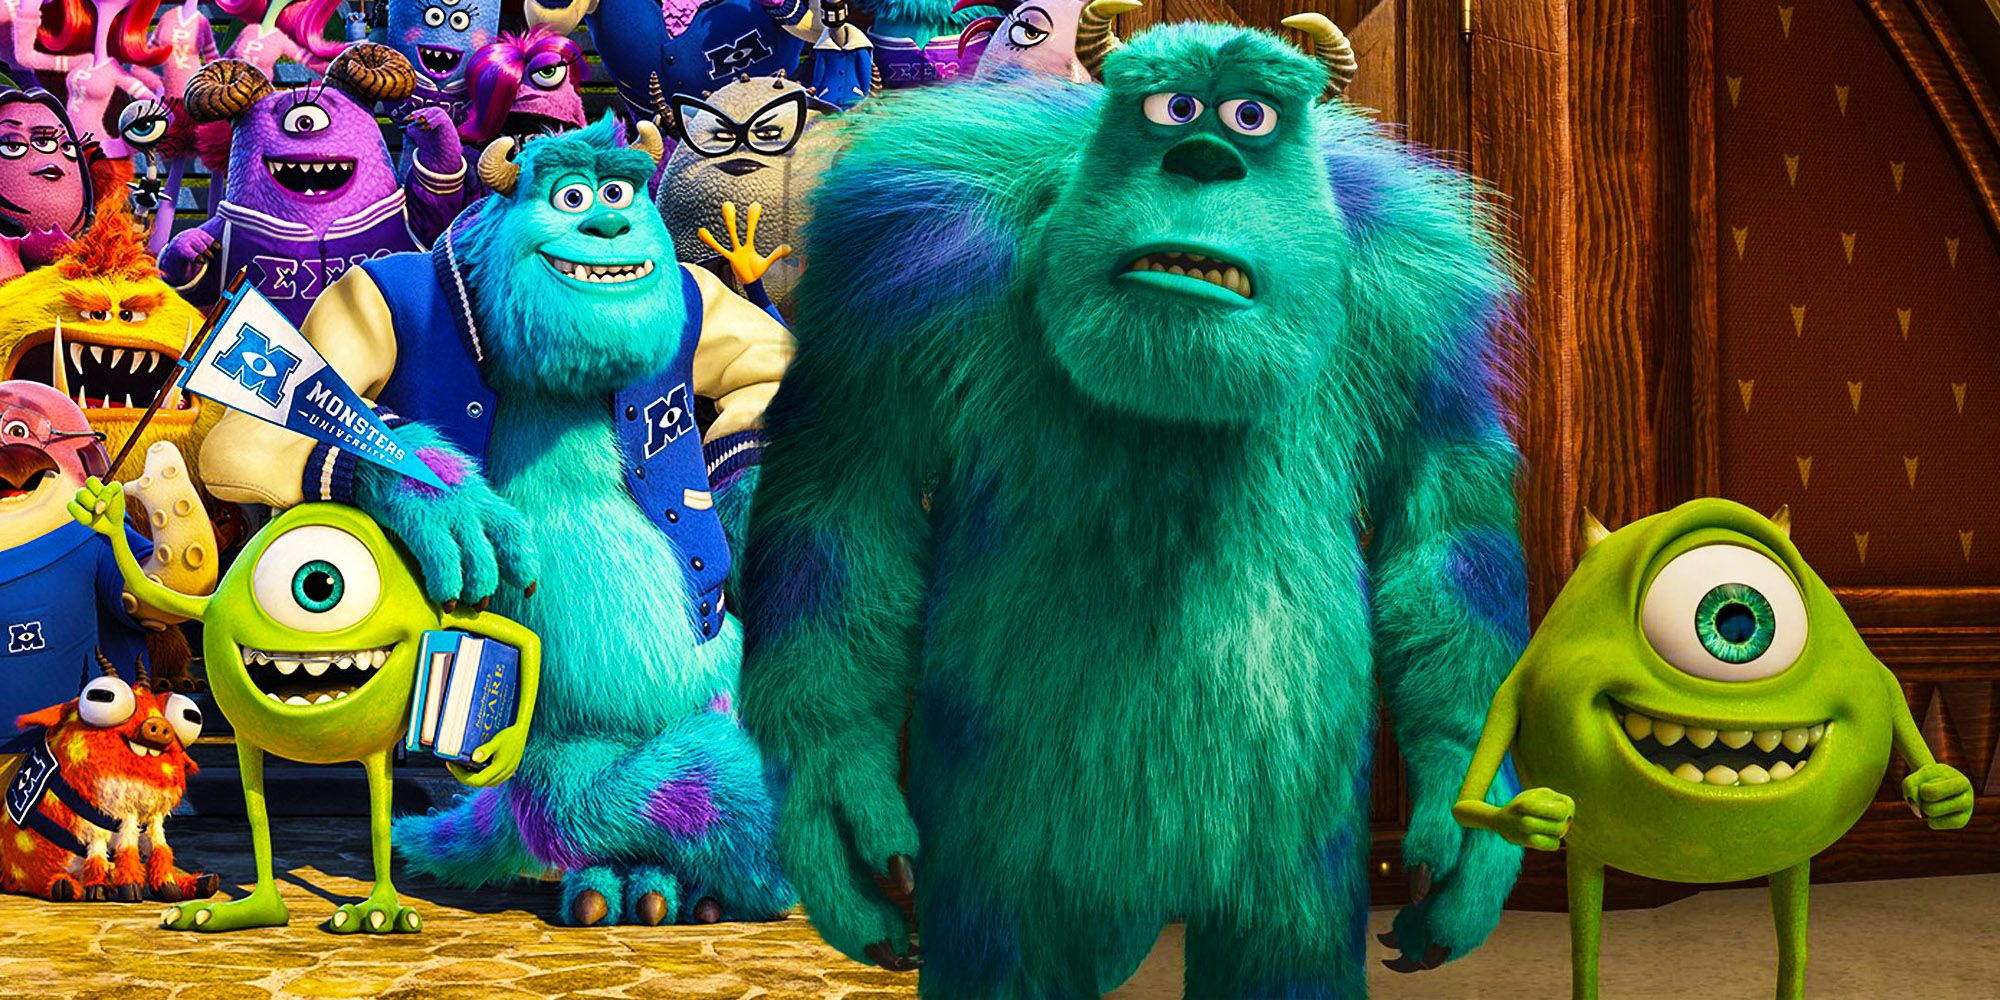 Monsters university retconned Mike and sully origin